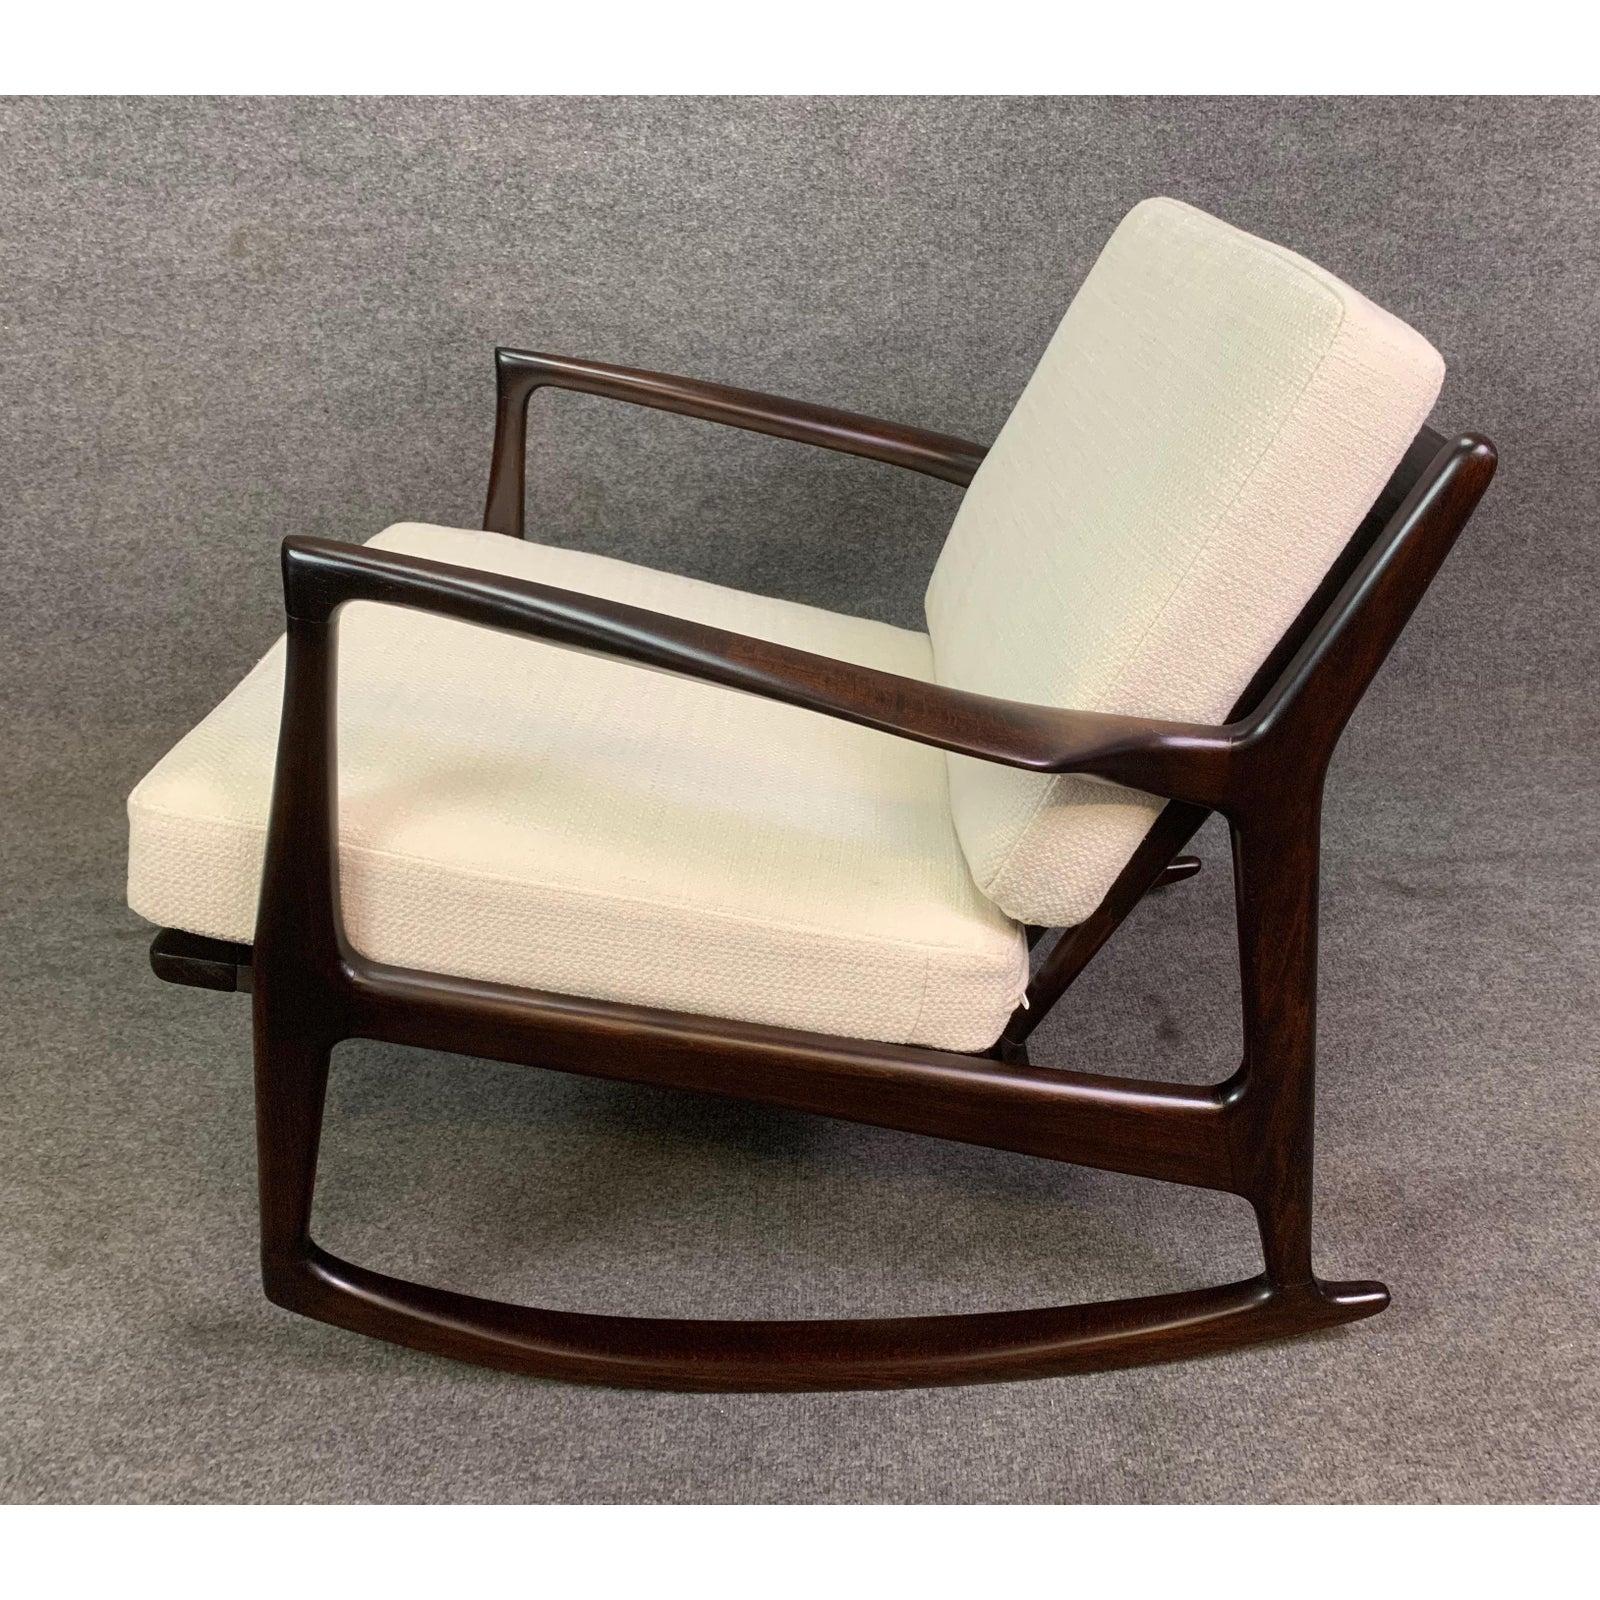 Mid-20th Century Vintage Danish Mid-Century Modern Rocking Chair by Kofod Larsen for Selig For Sale